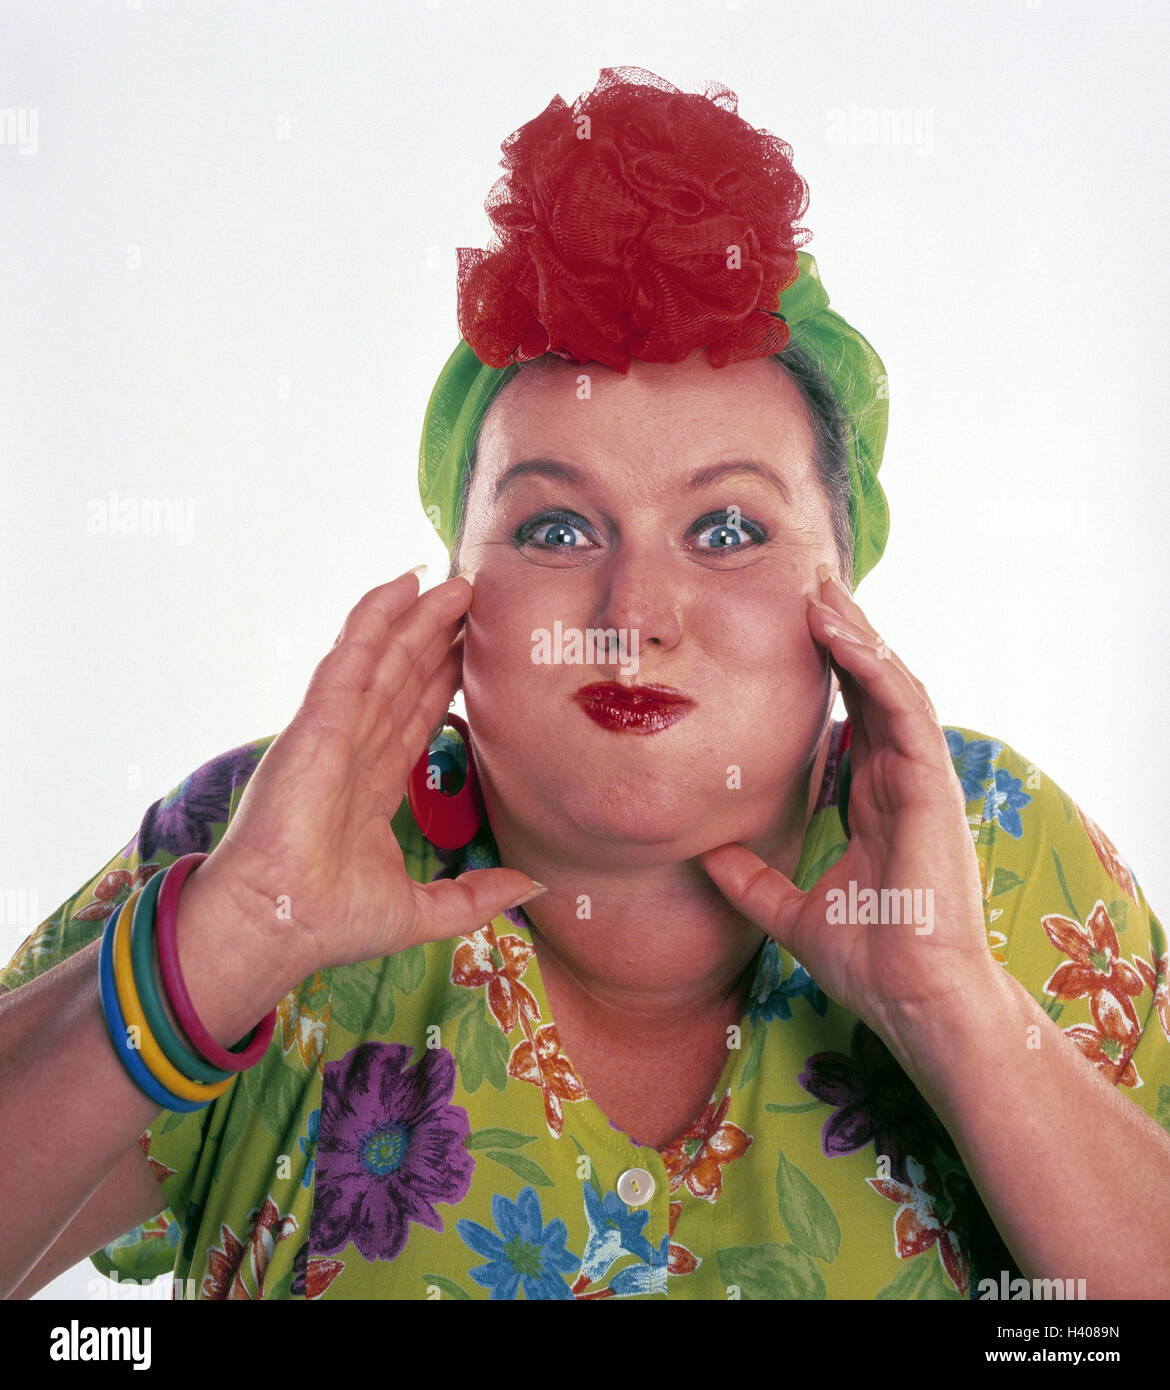 Woman, middle old person, thickly, headgear, clothes, brightly, chubby cheeks, gesture, portrait, Heavy Weights, inside, cut out, studio, housewife, earring bangle, costume jewellery, hair-band, hair ornament, summer dress, shrill, tastelessly, snort, chubby cheeks, near, Stock Photo